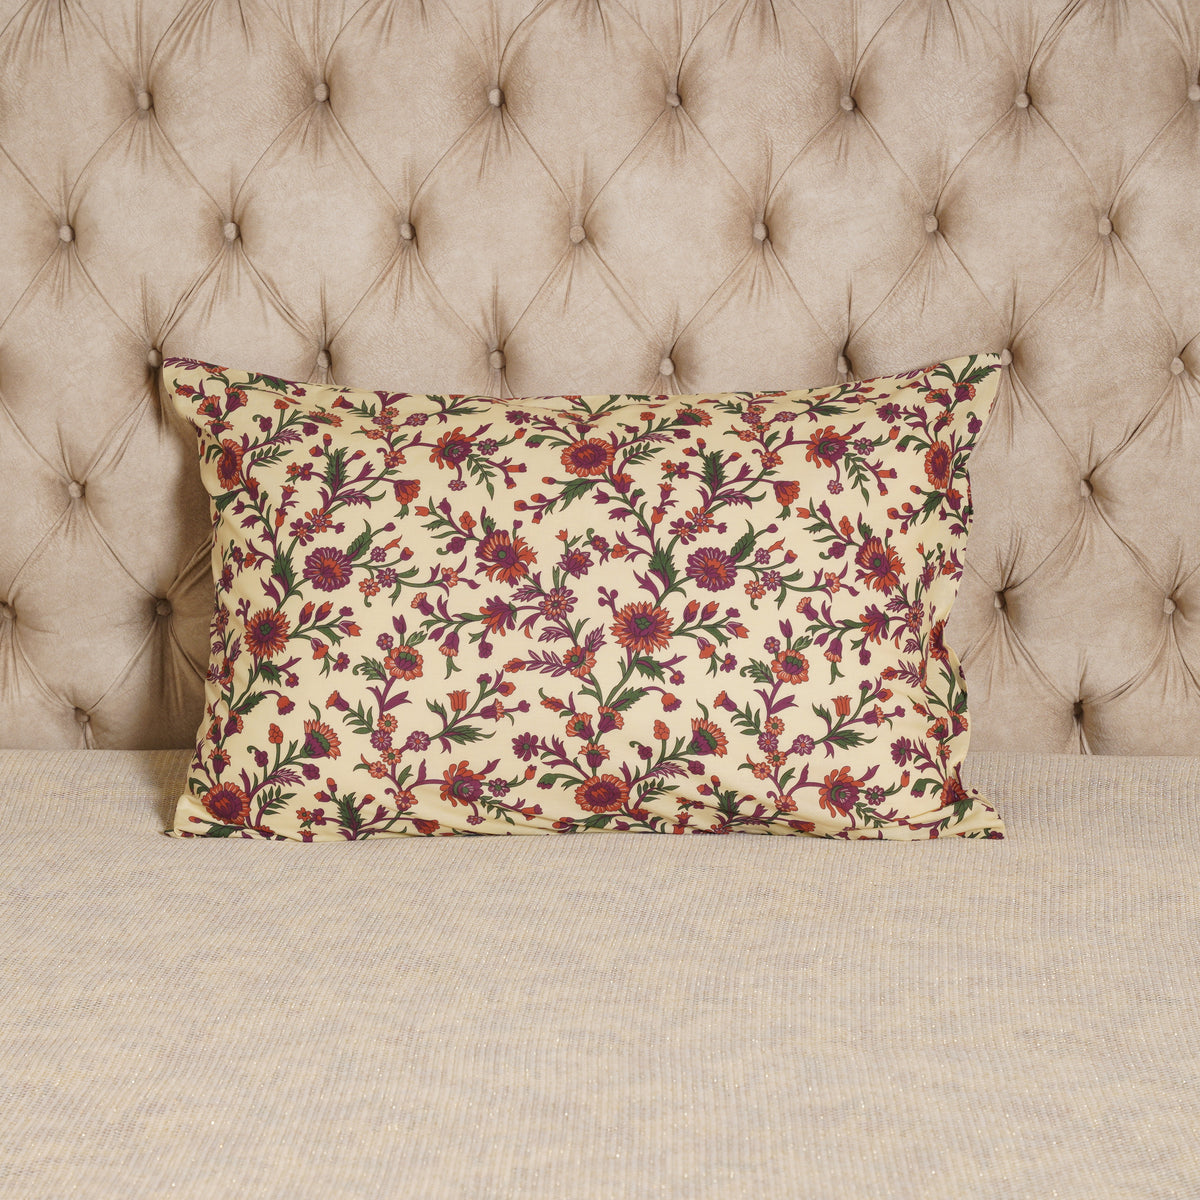 Pillow Cover - Blooming Buds